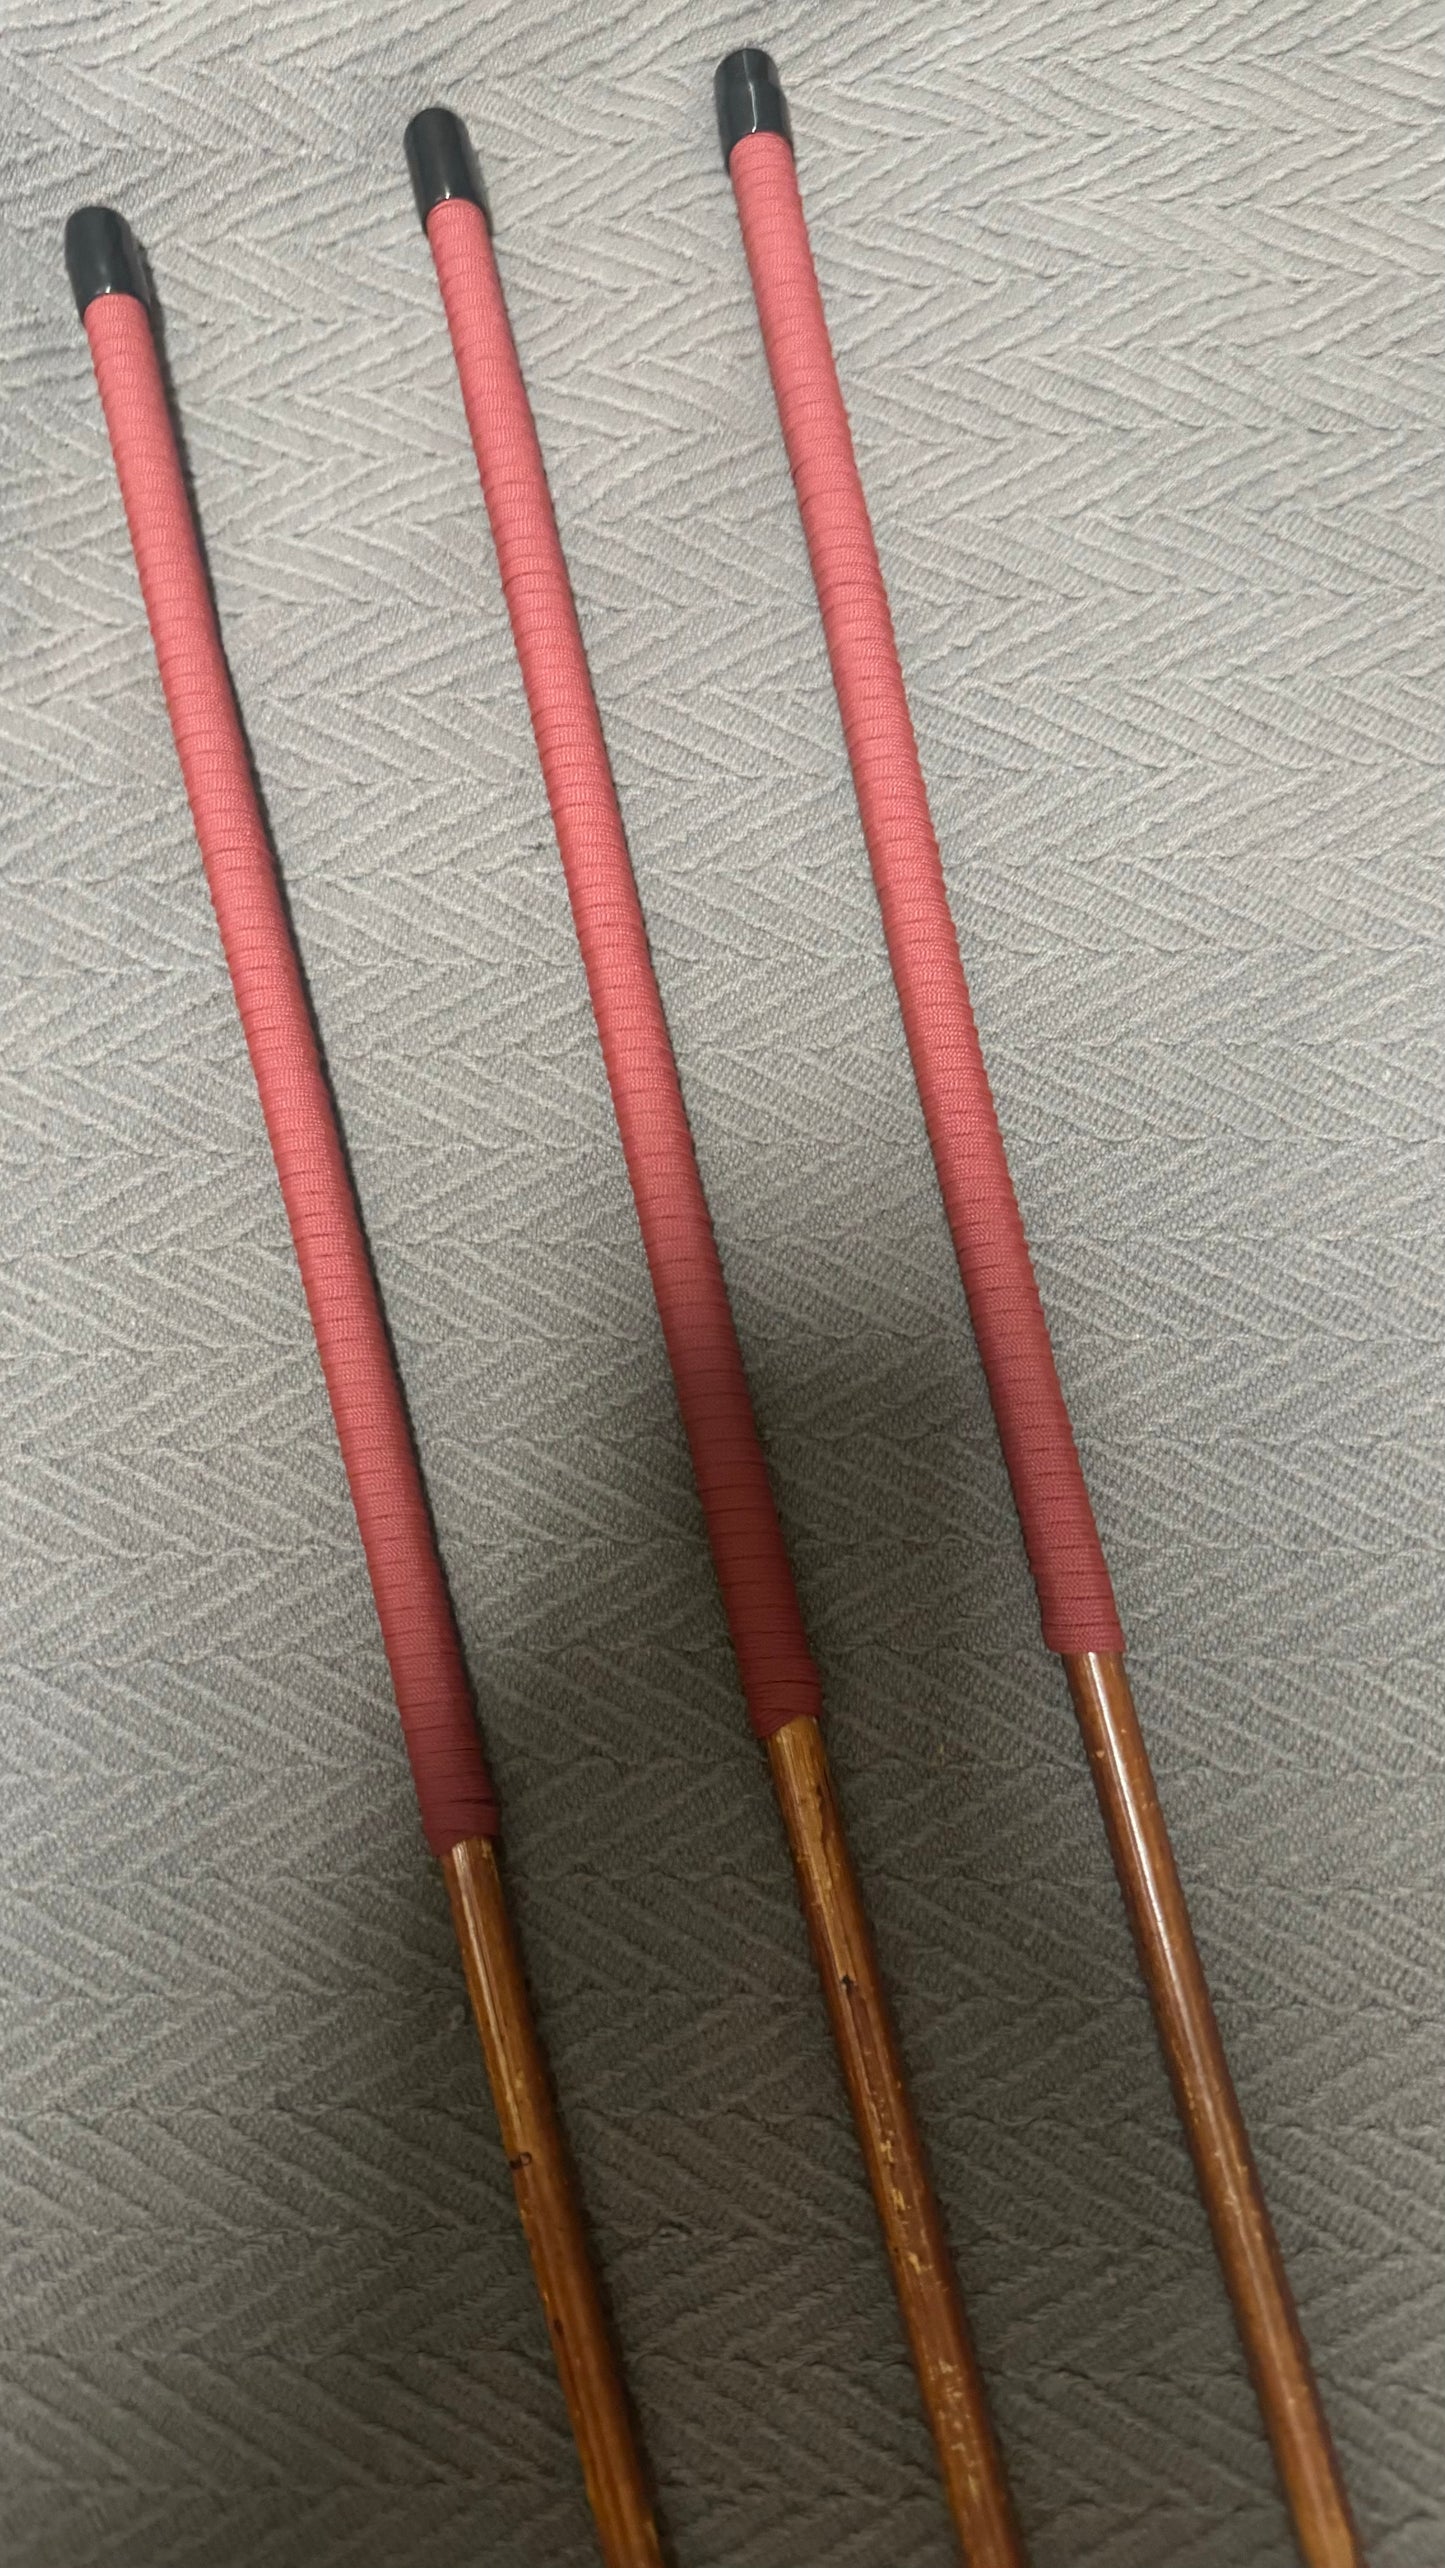 Set of 3 Smoked Dragon Rattan Canes with Imperial Red Paracord Handles - 95 to 98 cms L - 10 - 11.5 mm D - Englishvice Canes